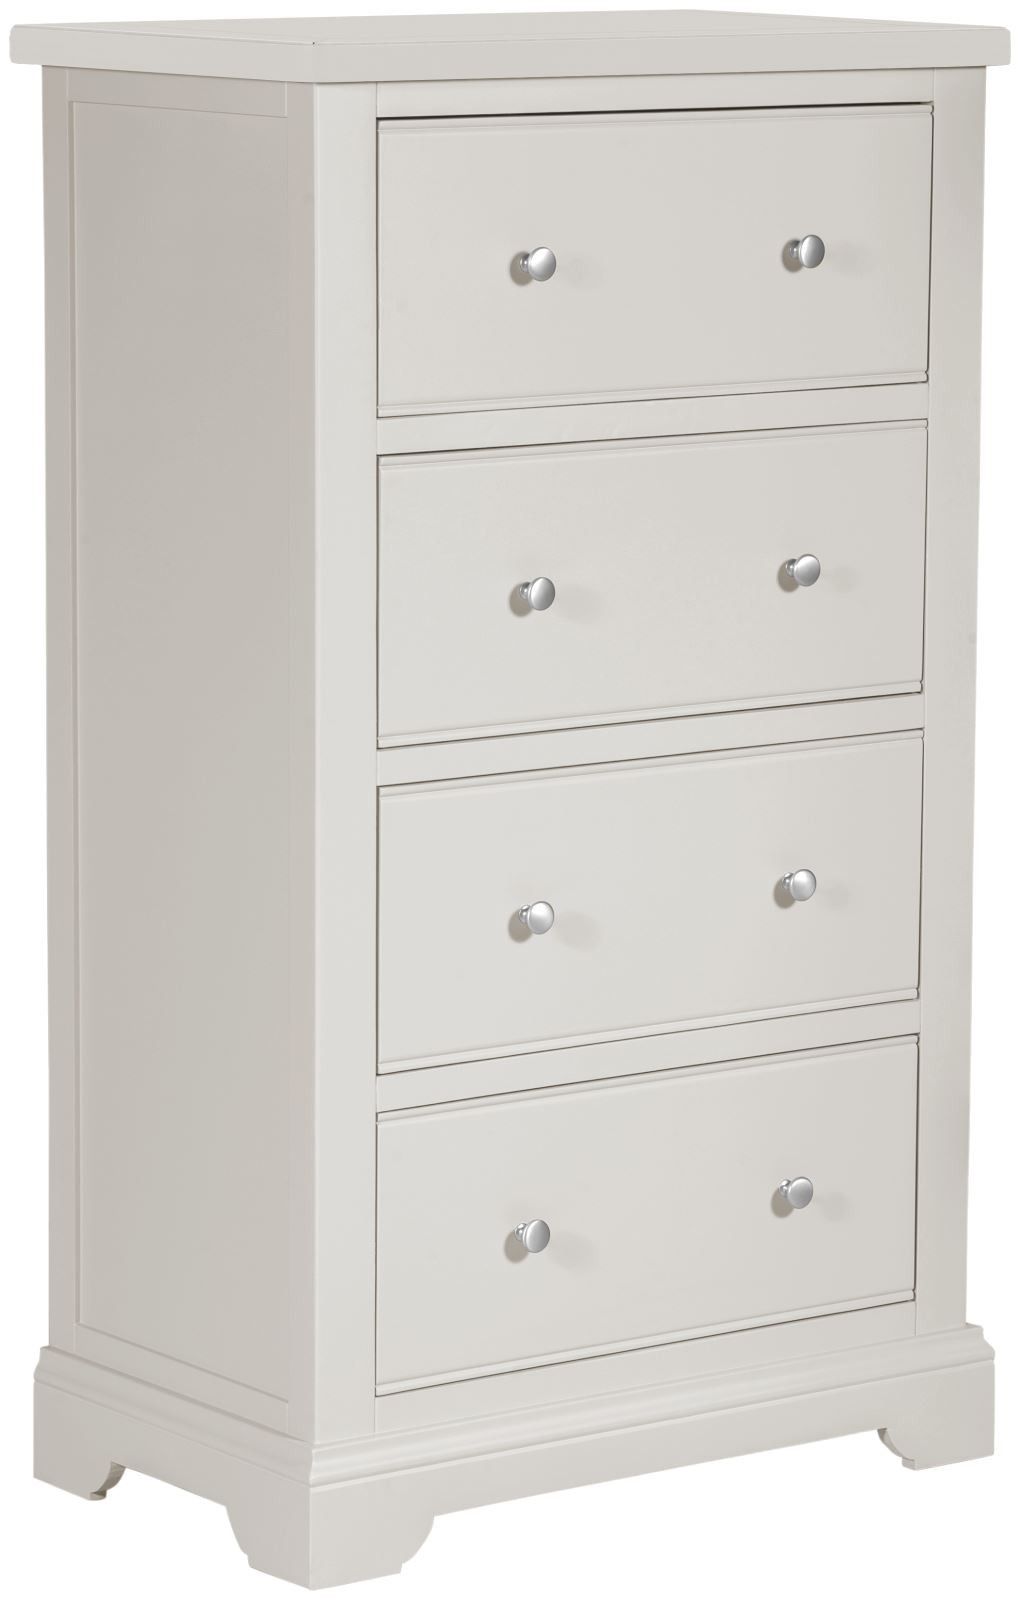 Wild Breeze 4 Drawer Tall Bedroom Chest